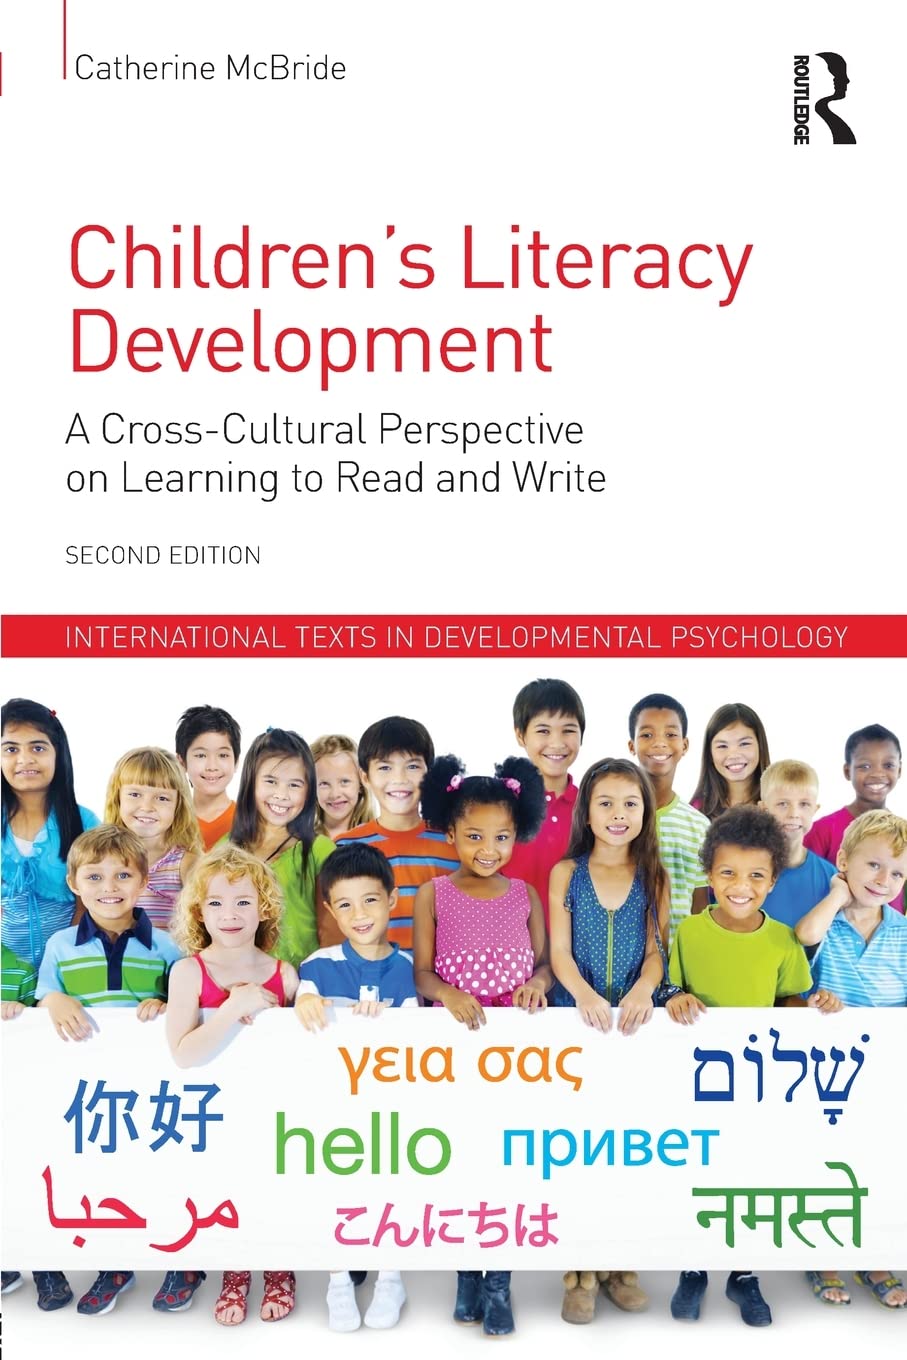 Children's Literacy Development: A Cross-Cultural Perspective on Learning to Read and Write (International Texts in Developmental Psychology)